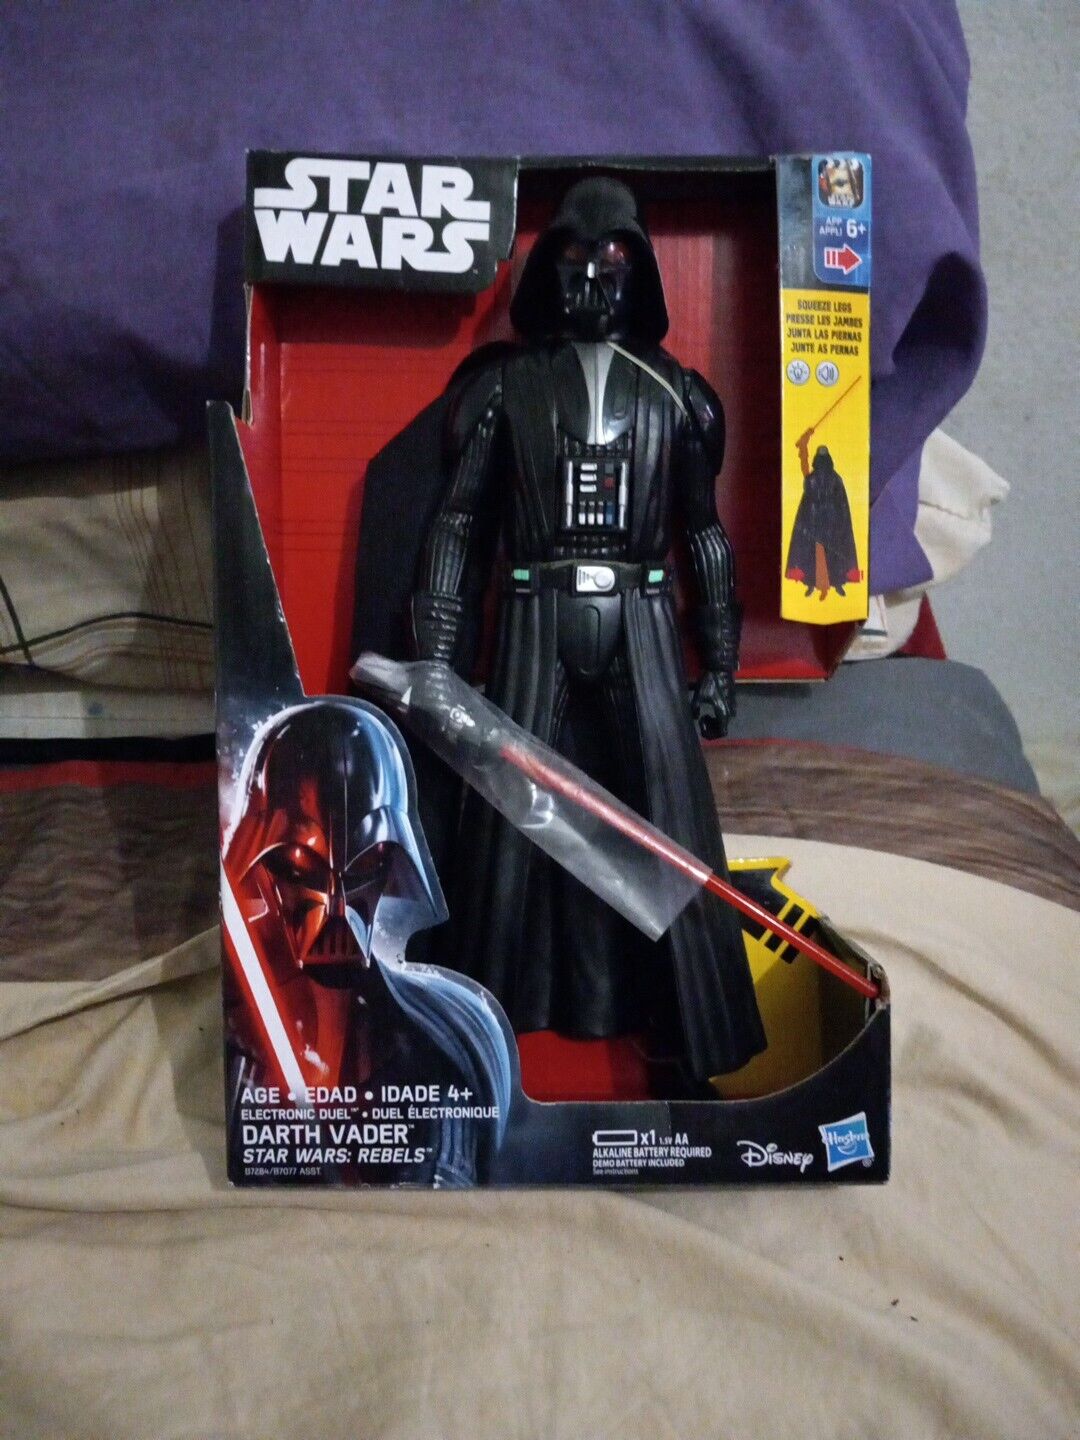 Star Wars Rebels Darth Vader Electronic Duel 12 Inch Action Figure In Box NEW Hasbro